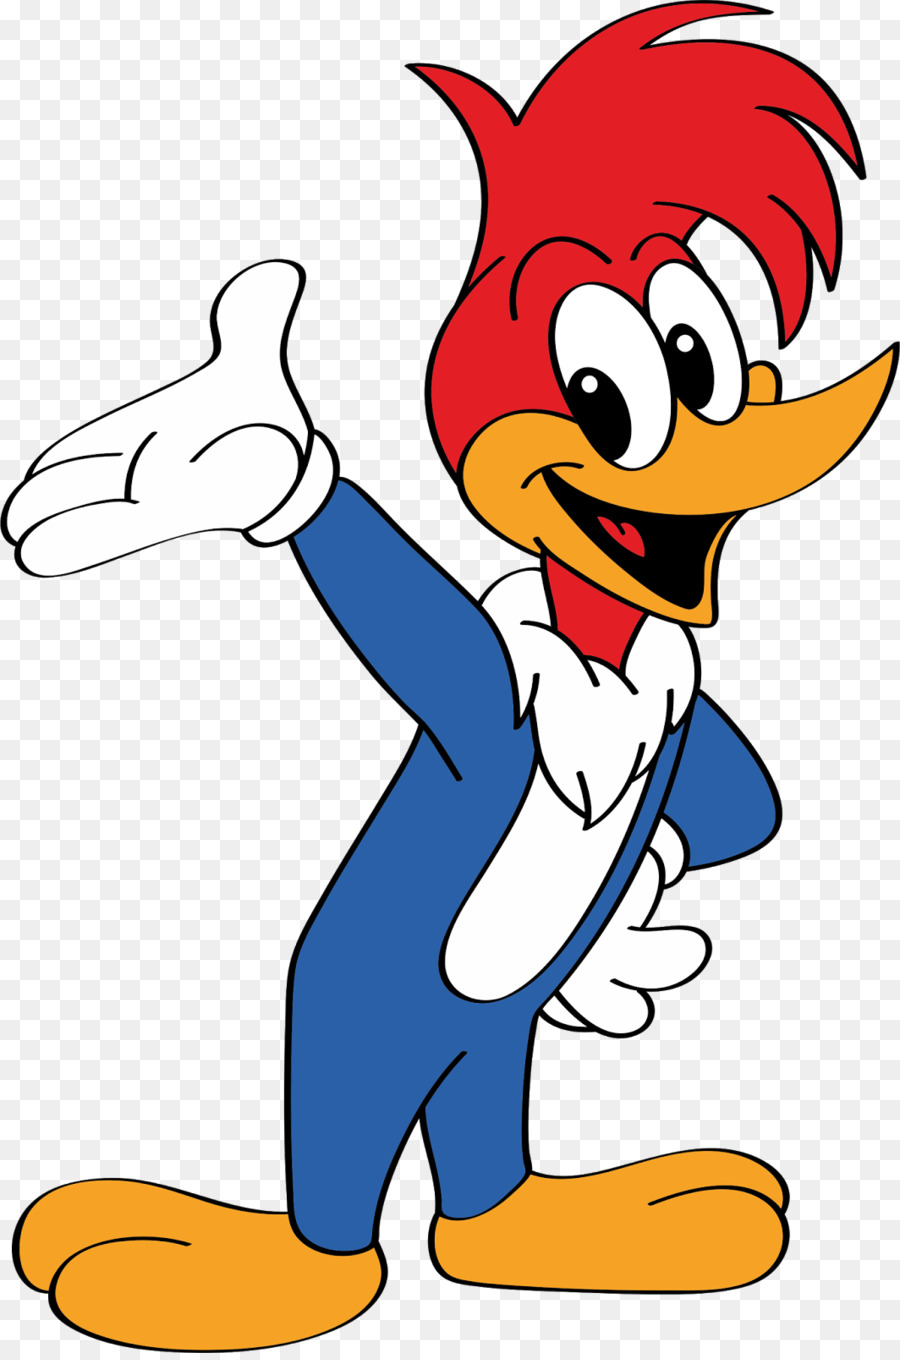 Woody Woodpecker png download - 1064*1600 - Free Transparent Woody ...